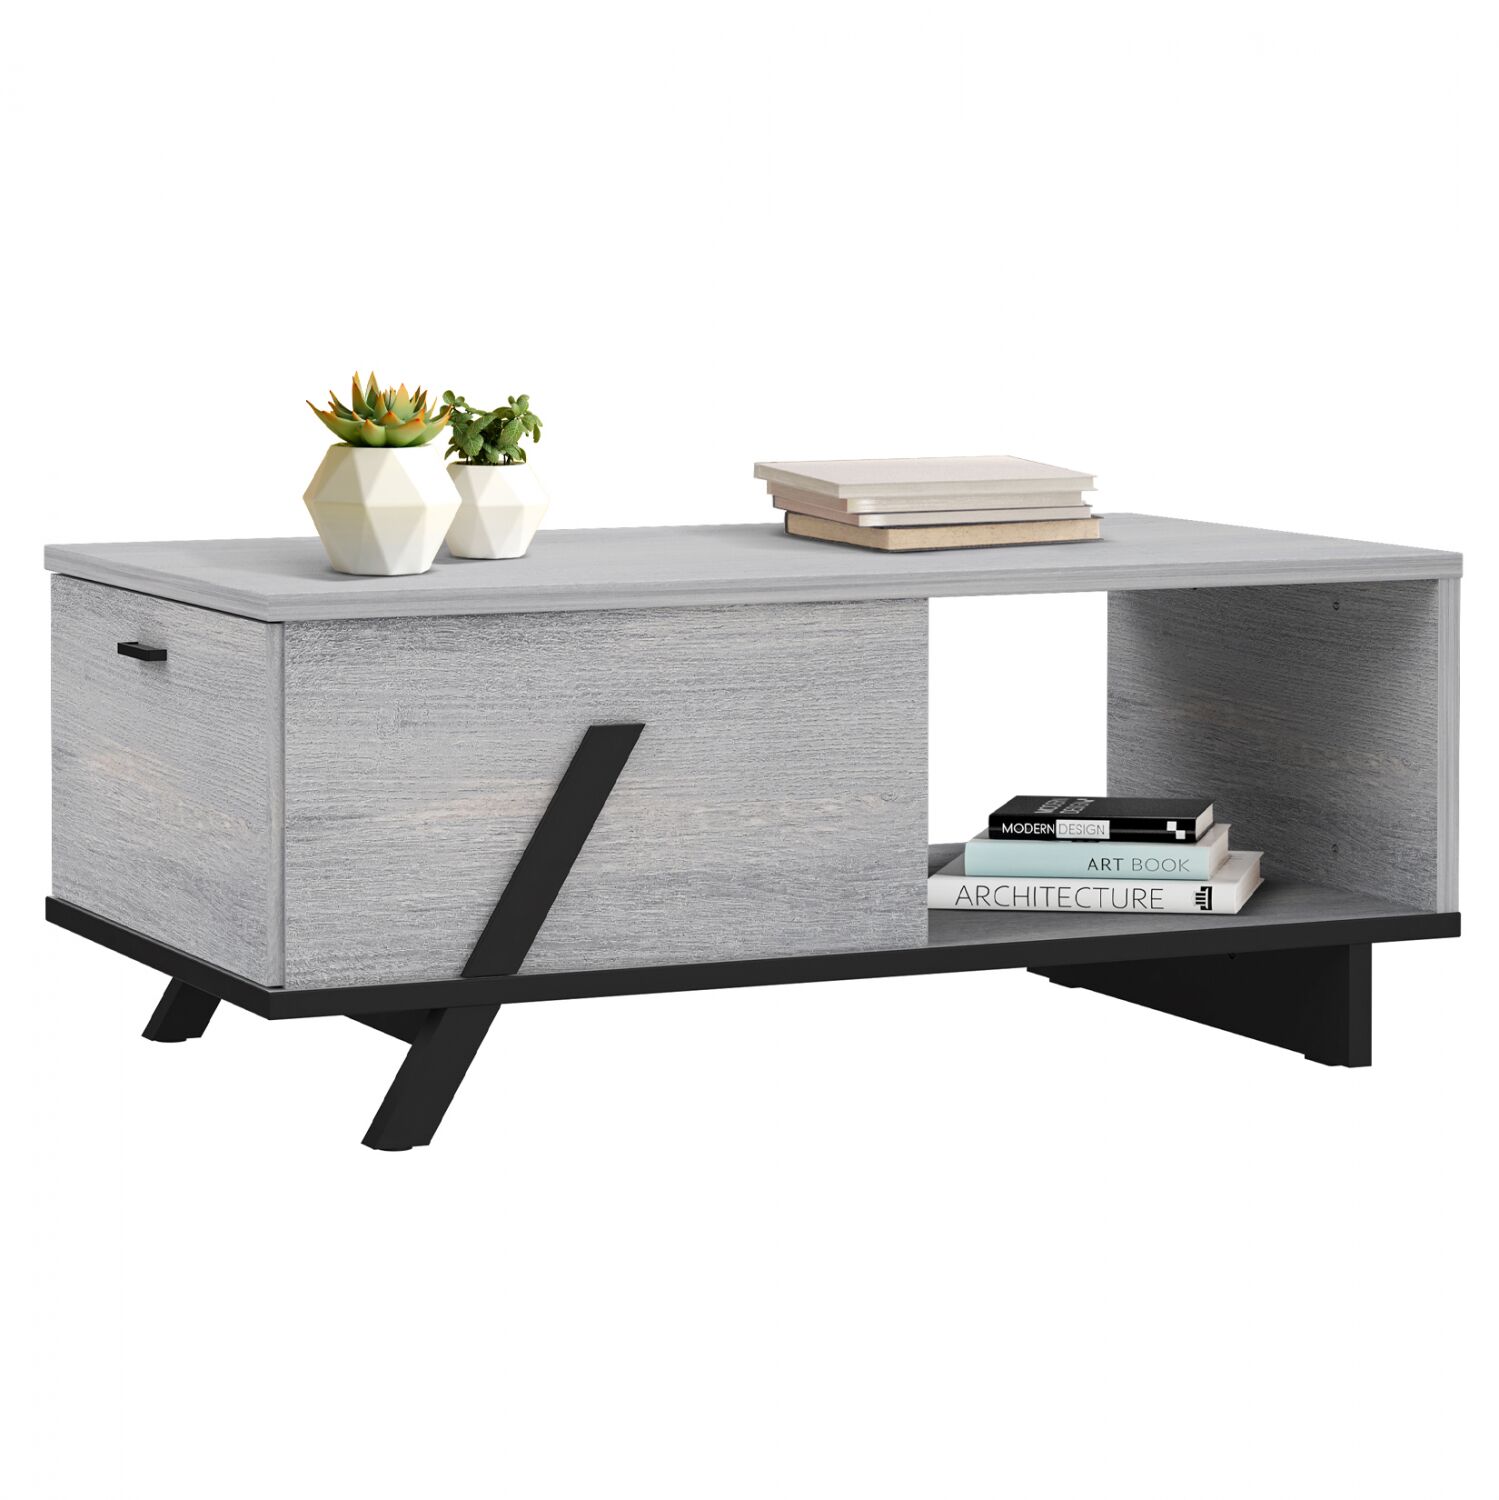 LIVING ROOM TABLE OTTO HM8815 GREY AND BLACK 110x60x33 cm.